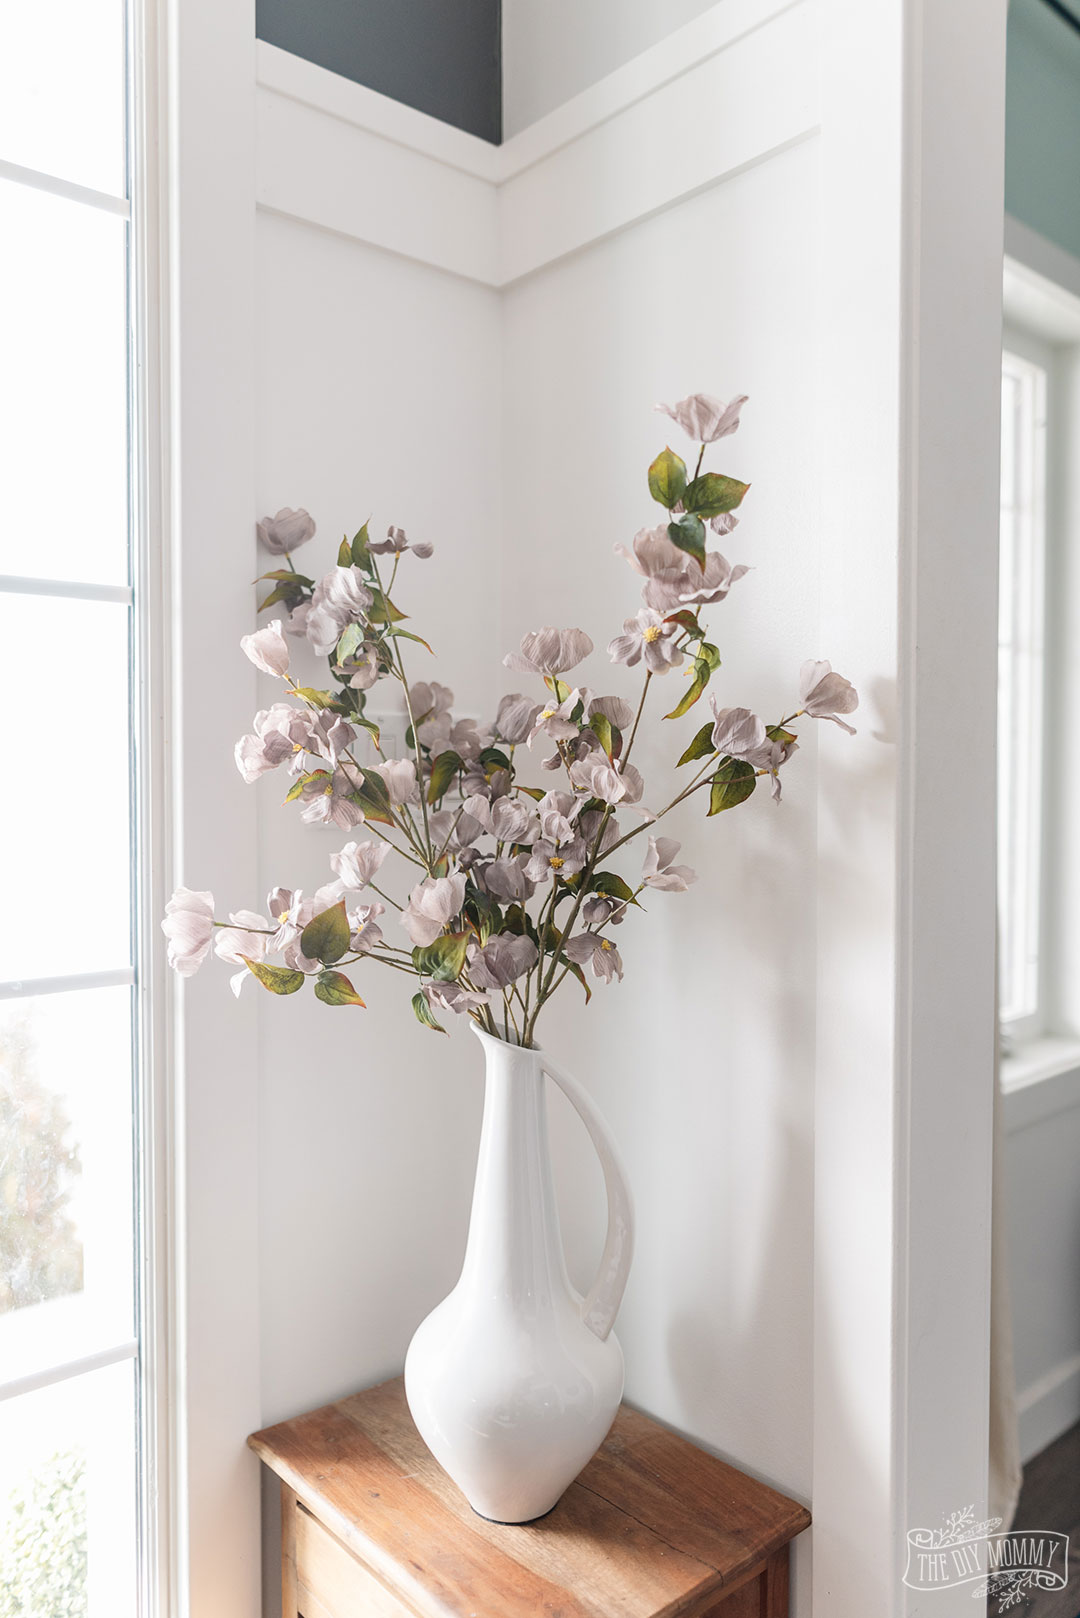 Learn how to make your home feel calm and safe this Spring while using what you have | Spring Home Tour Decor Ideas